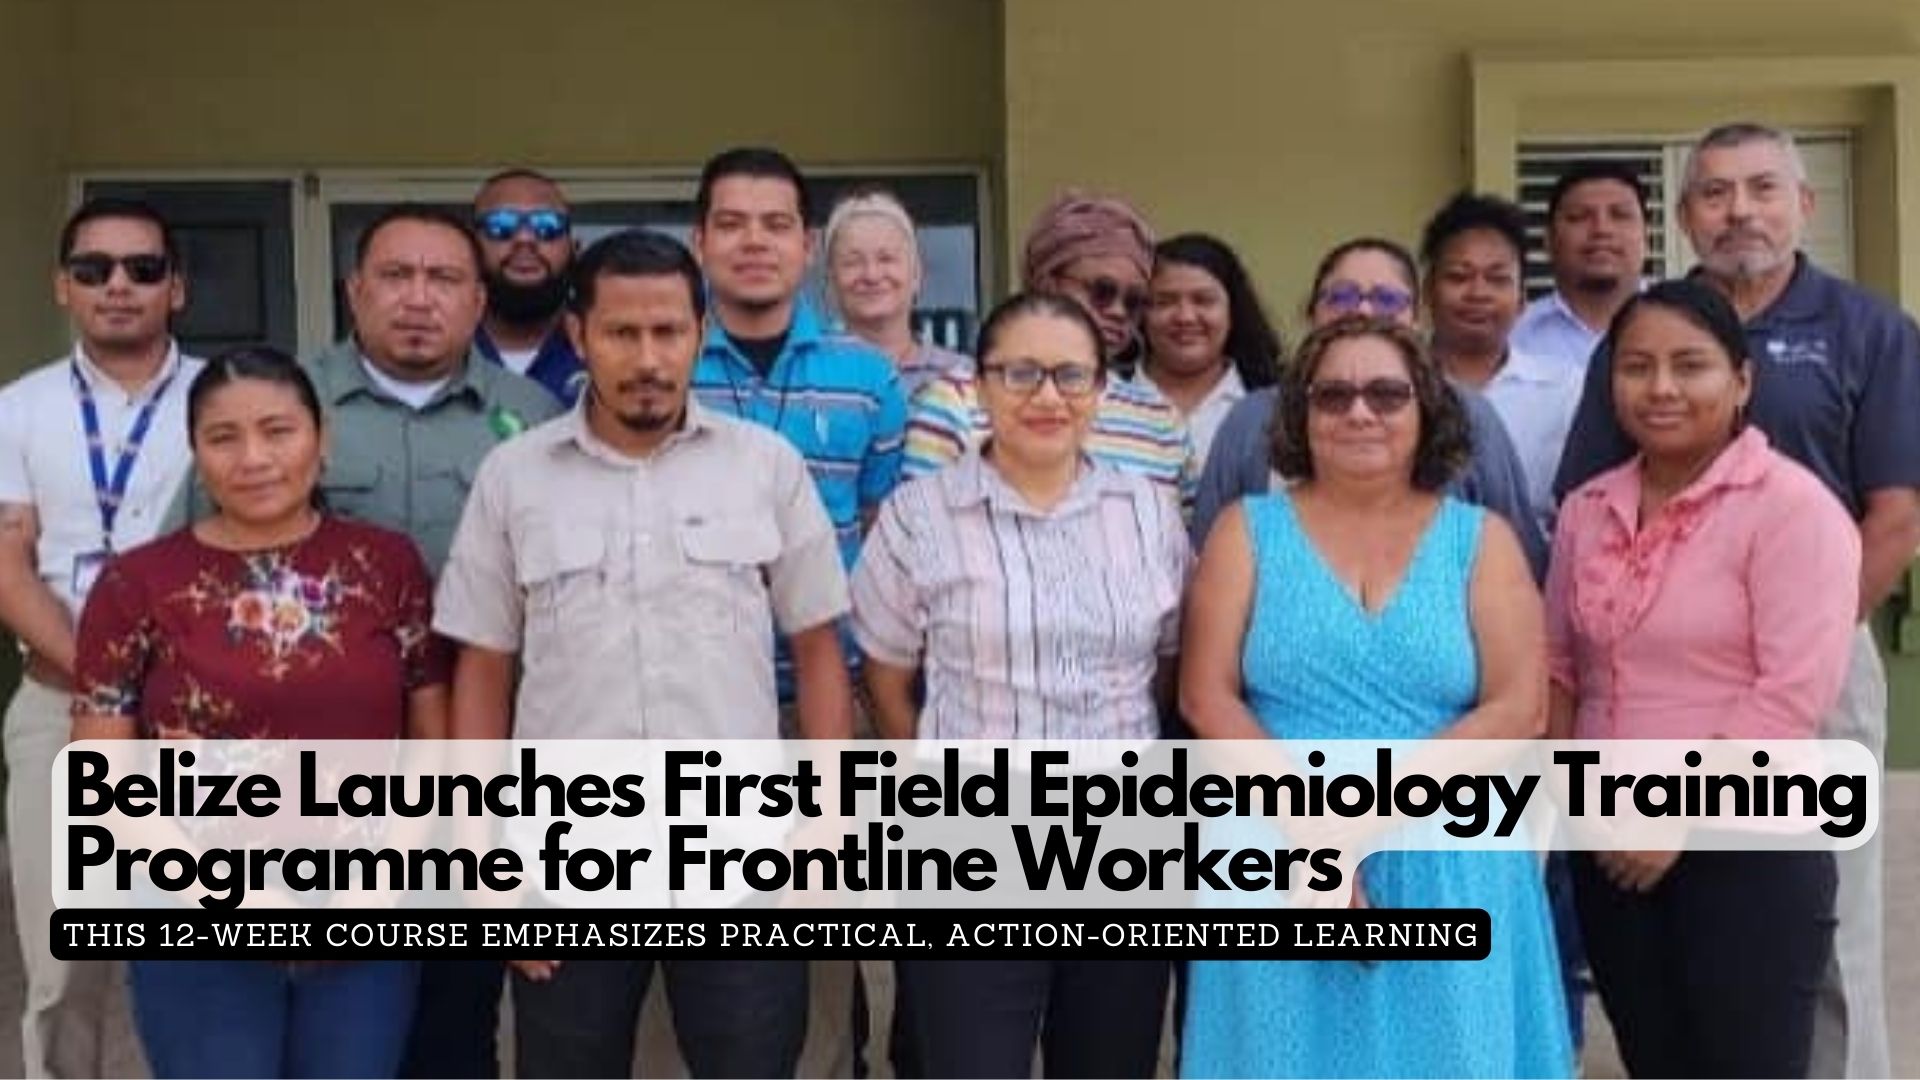 Belize Launches First Field Epidemiology Training Programme for Frontline Workers